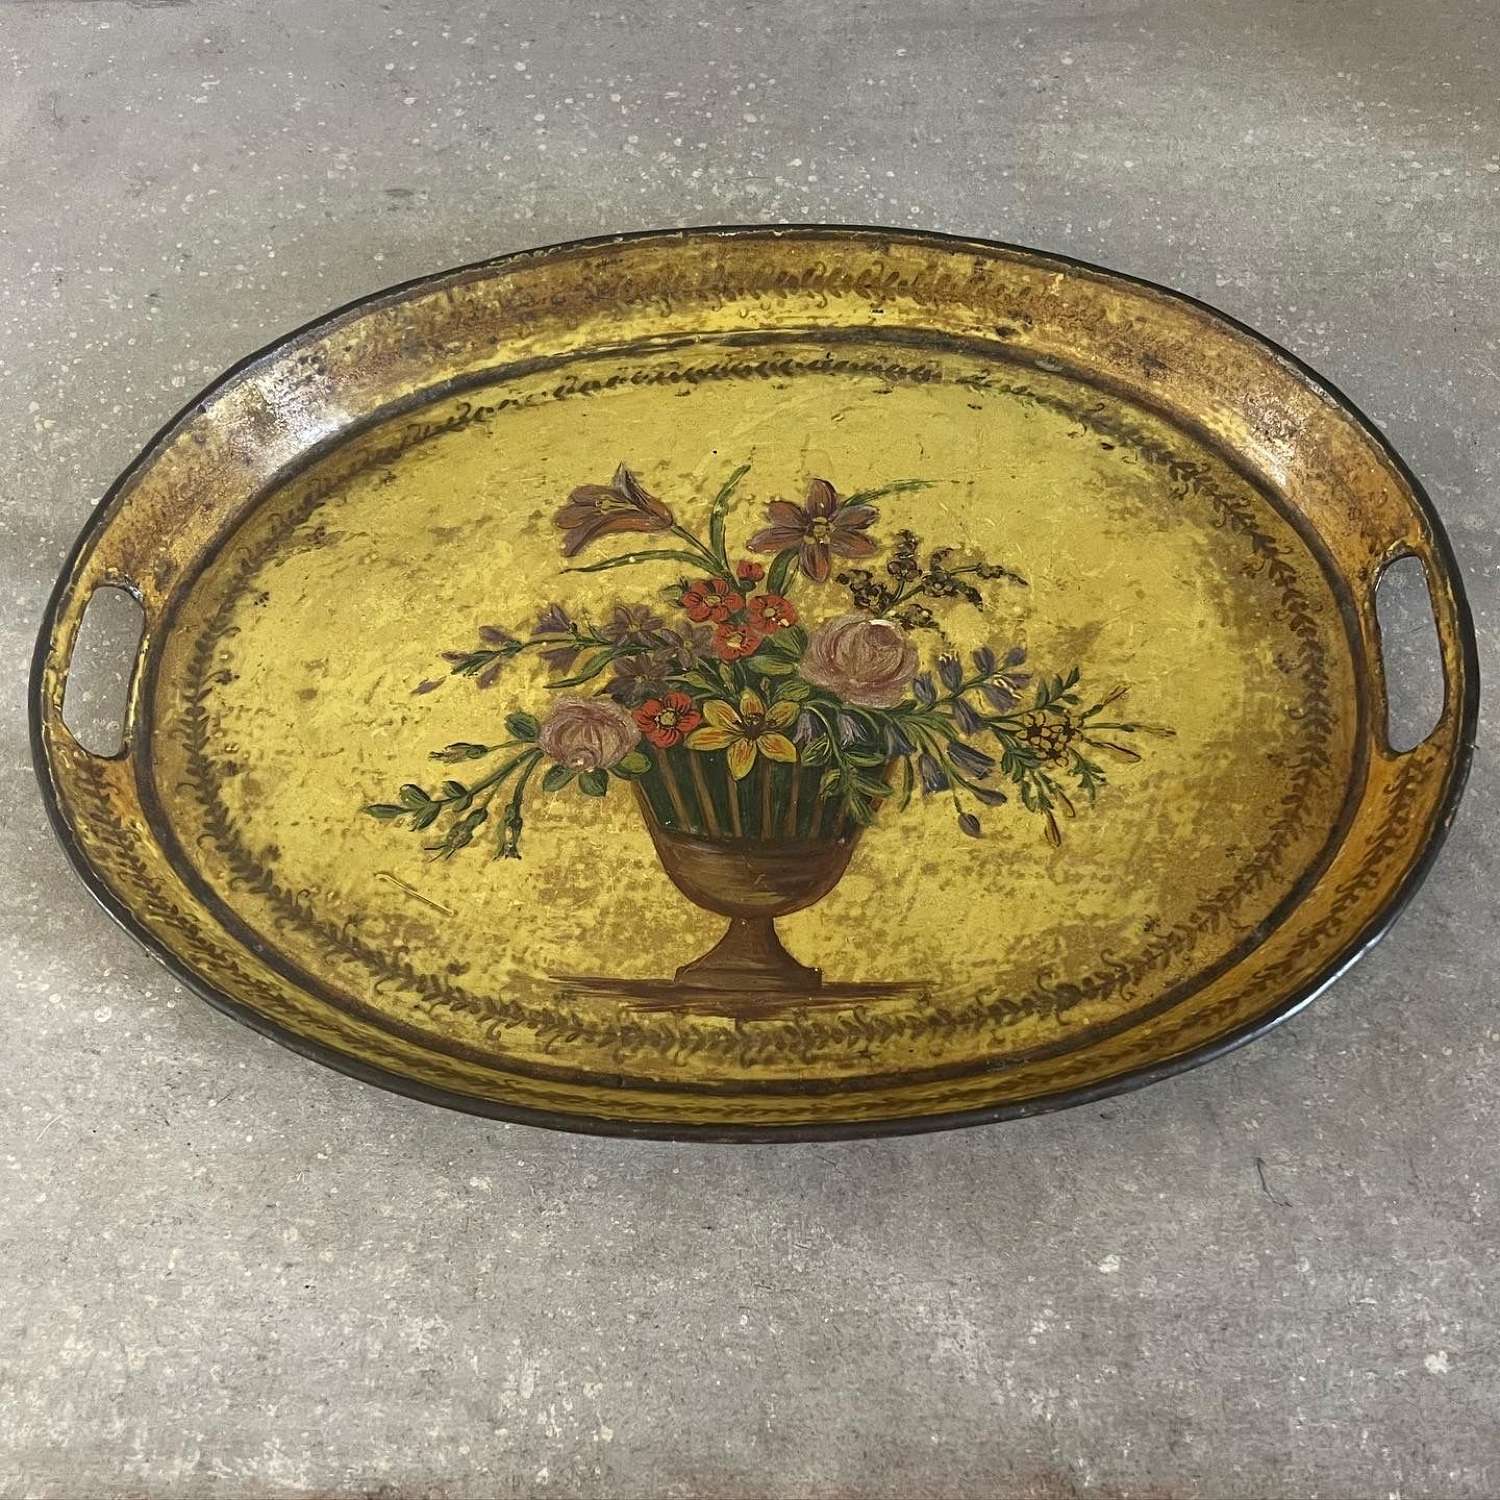 Beautiful Victorian Toleware Tray - Flowers in Urn